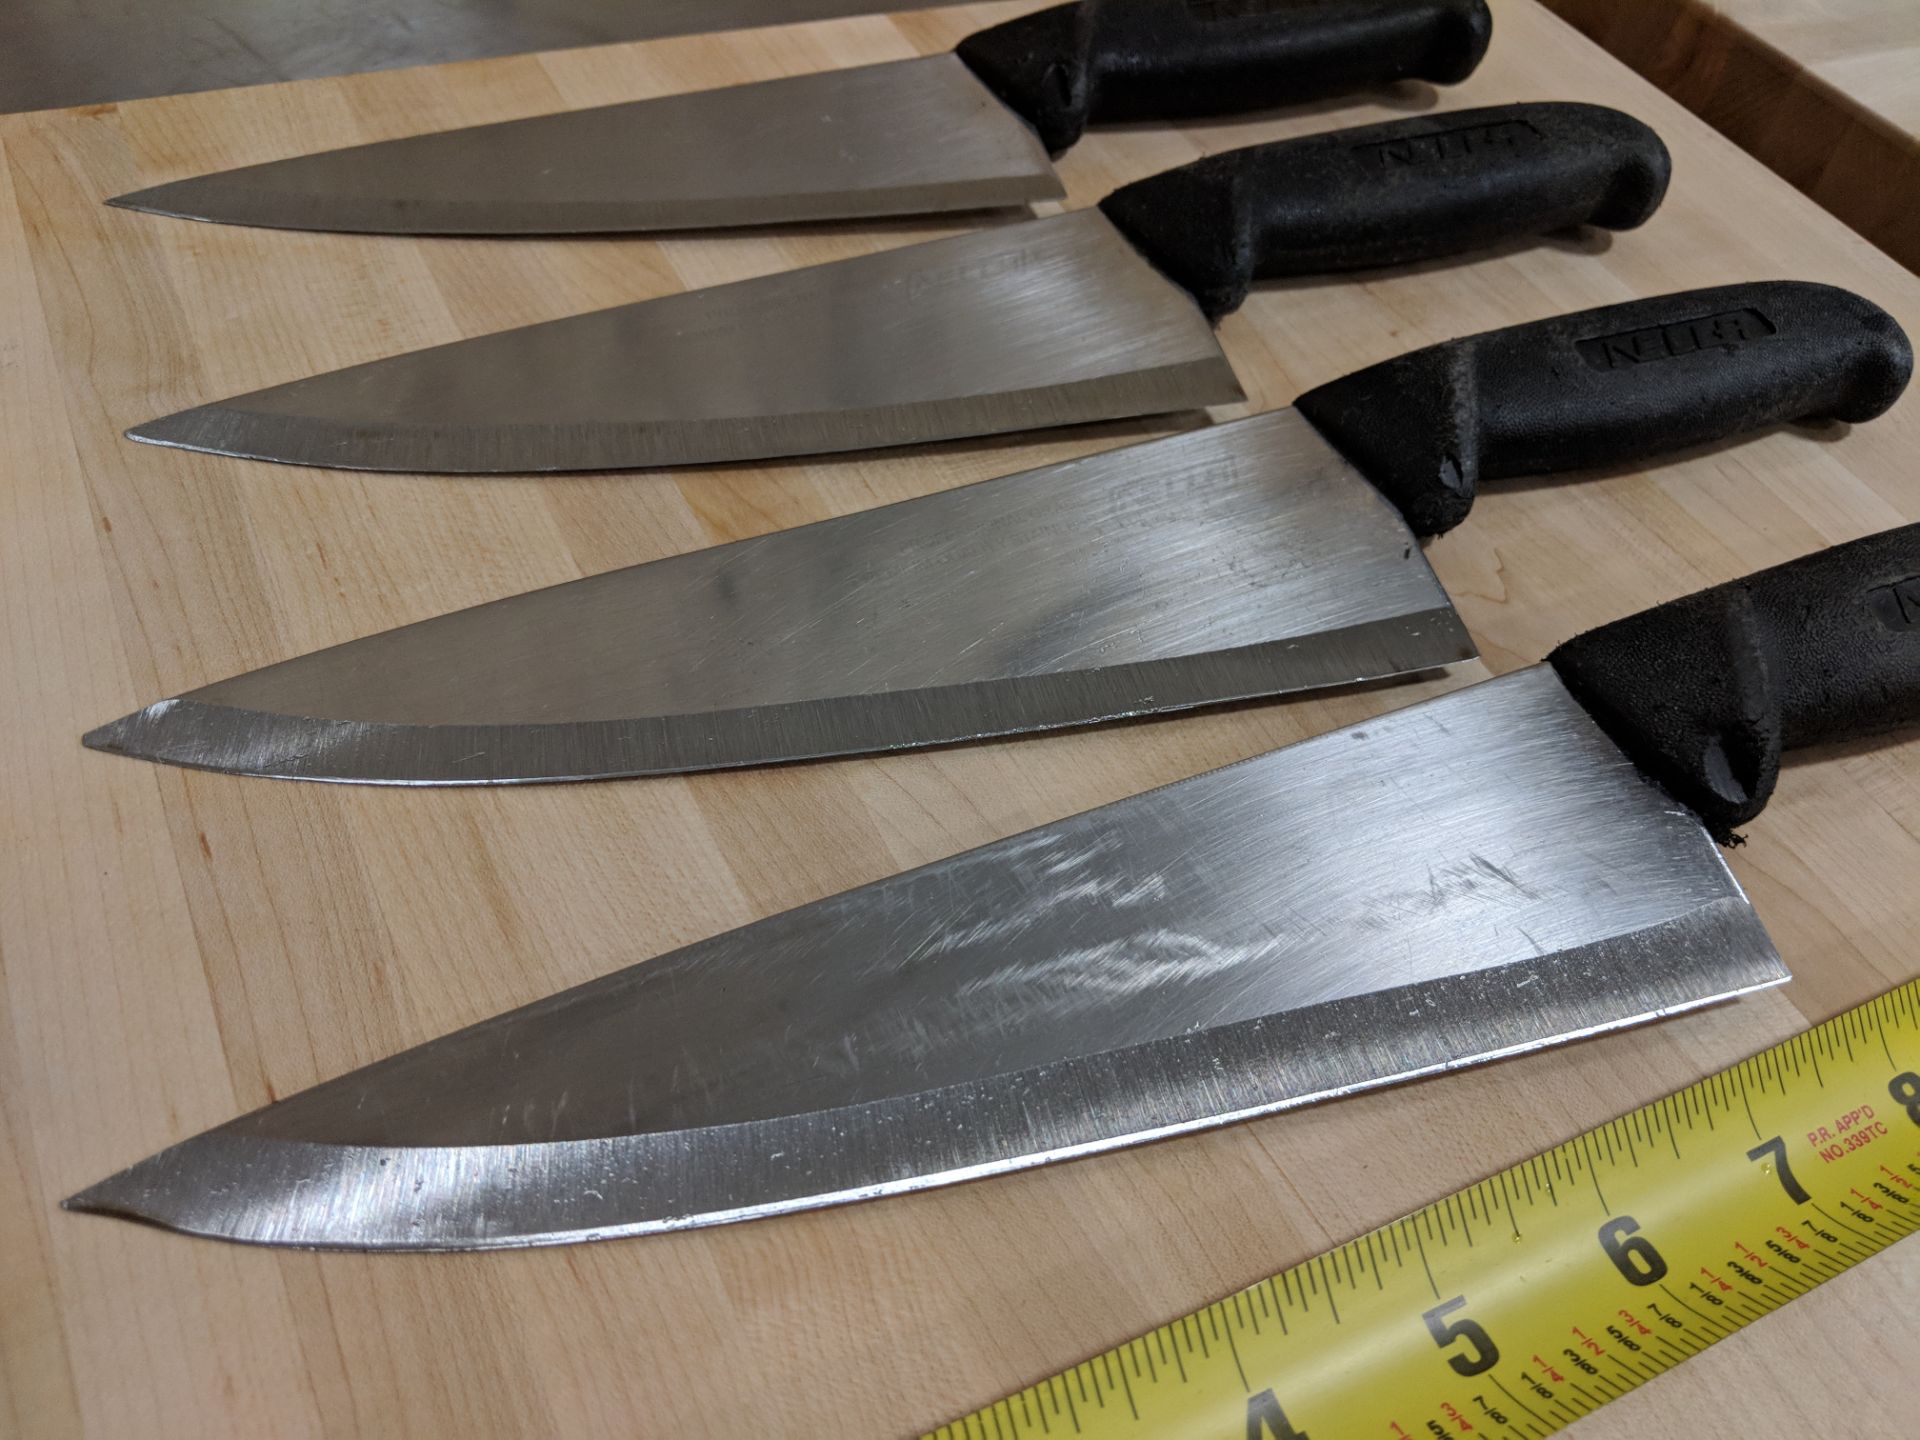 Black Knives - Lot of 4 - Image 2 of 2